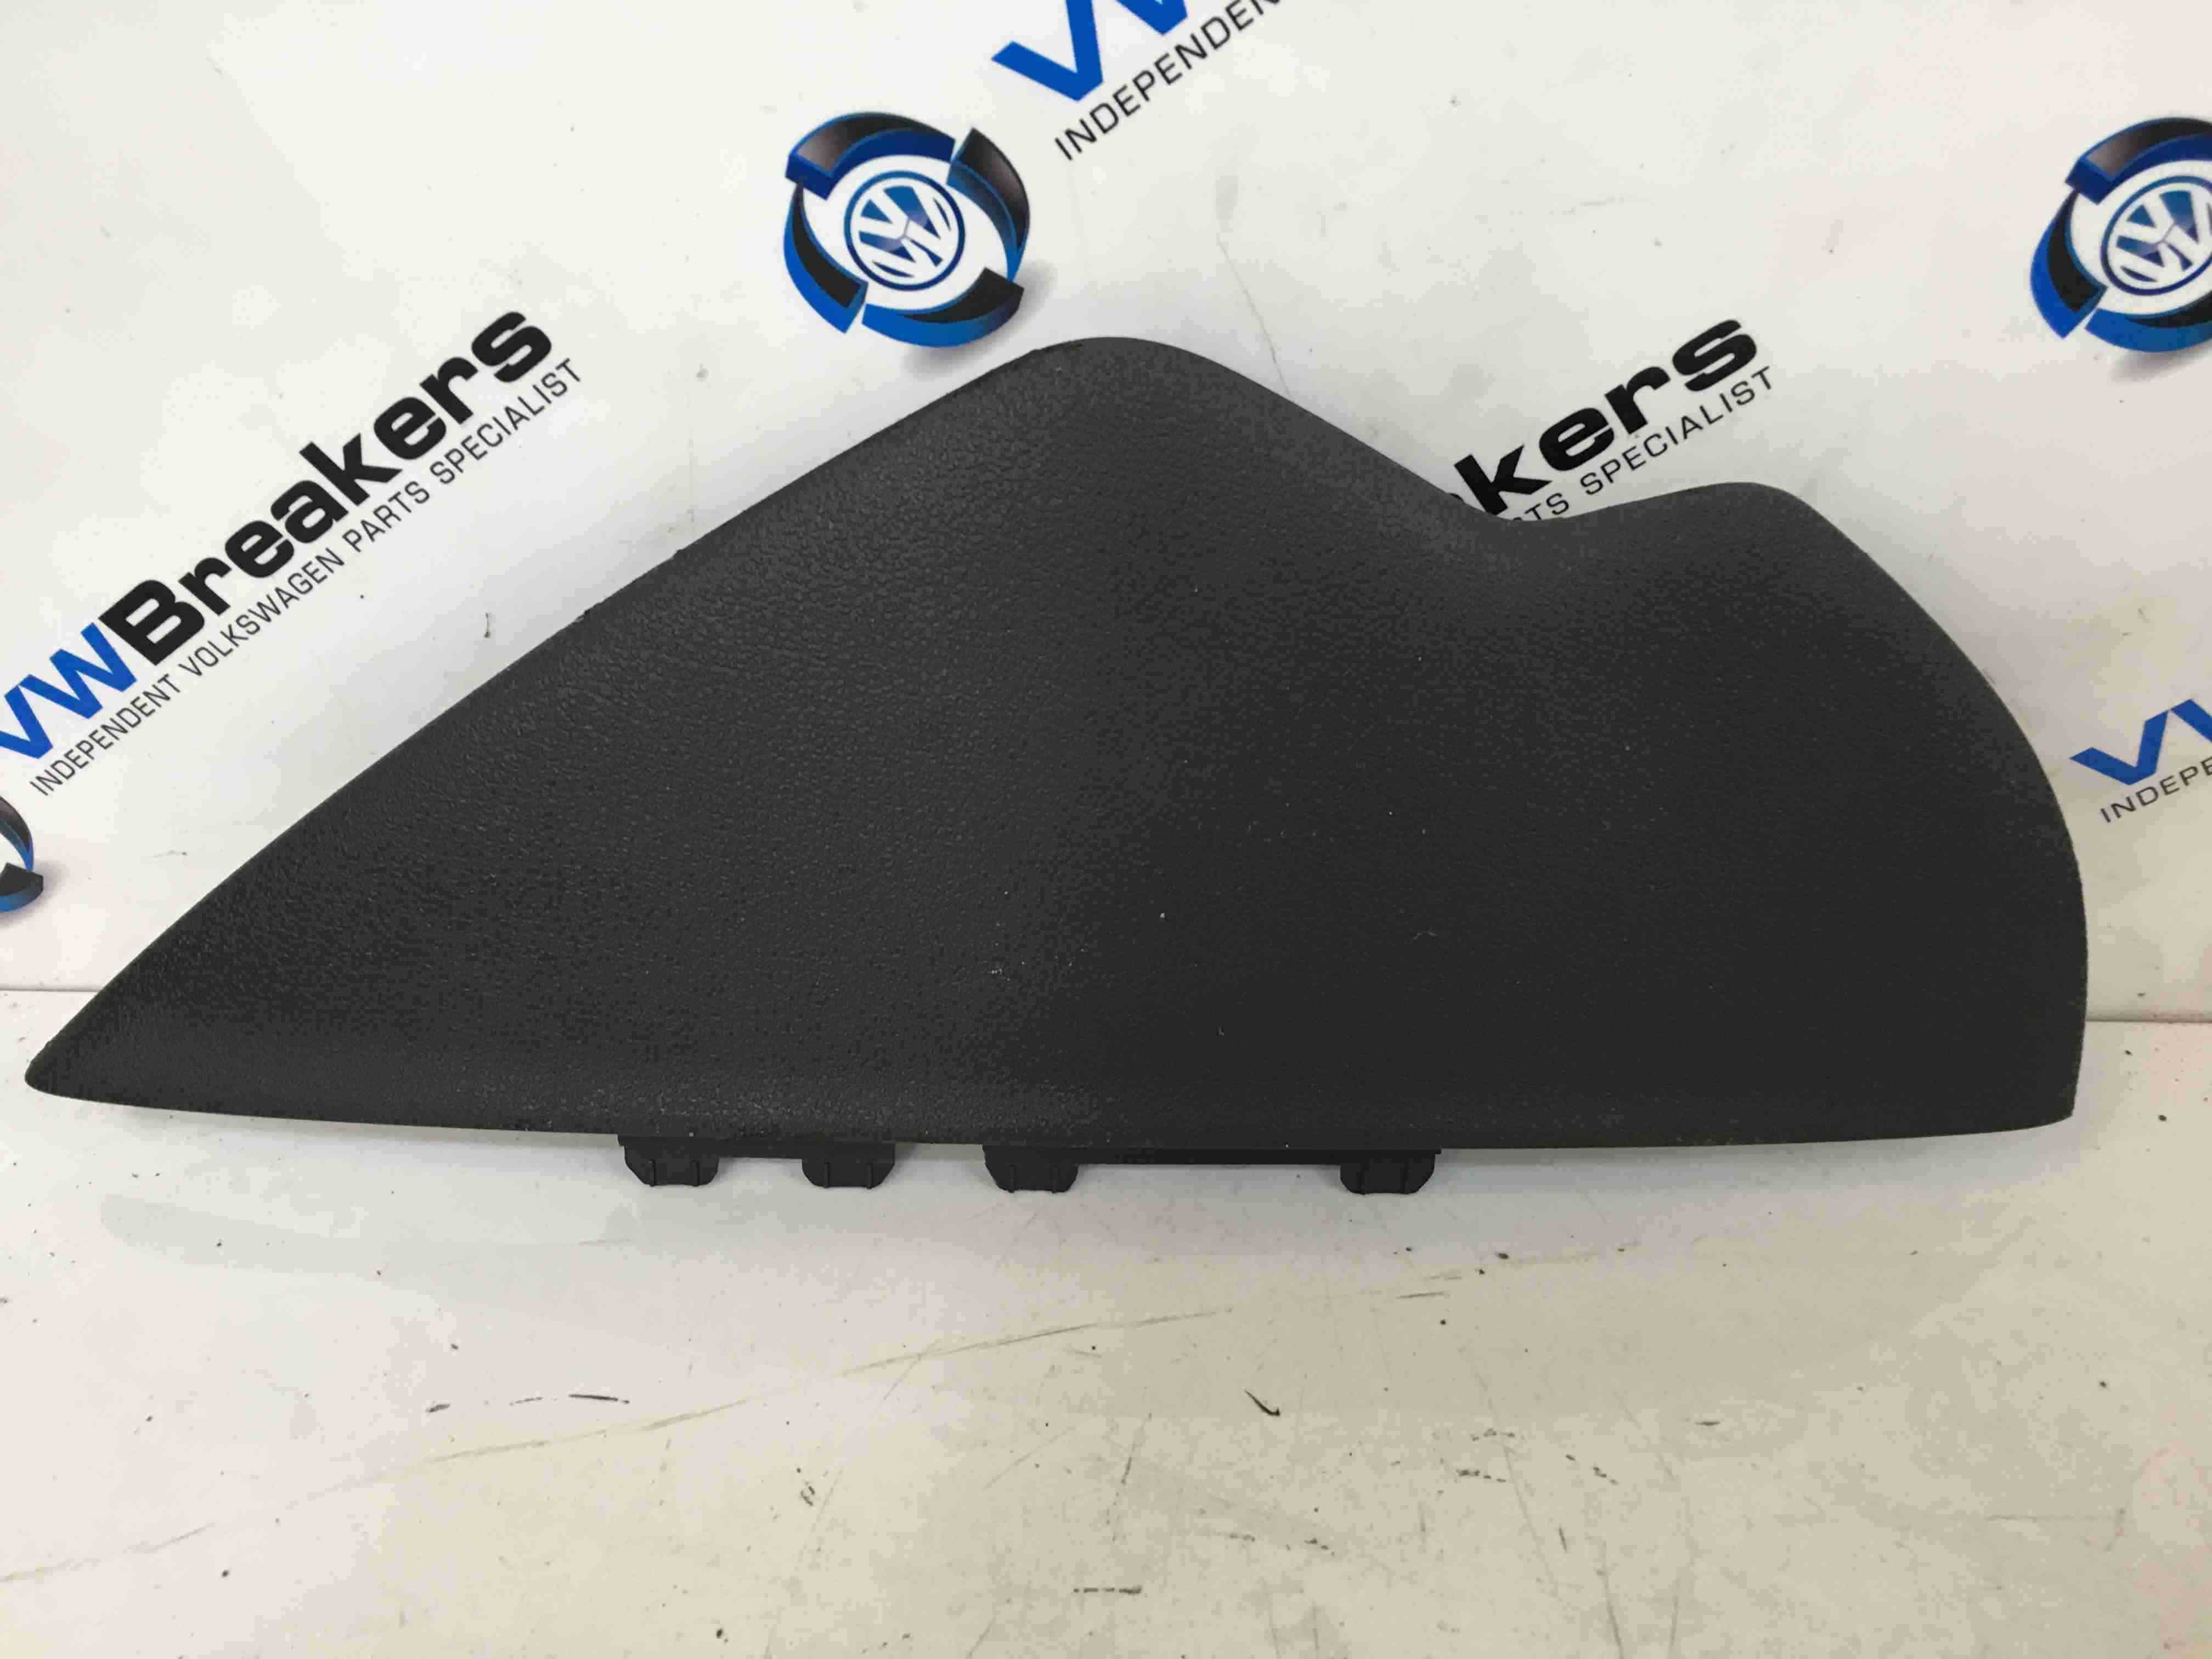 Volkswagen Caddy 2004-2010 Drivers OSF Front Dashboard End Cover Trim Plastic